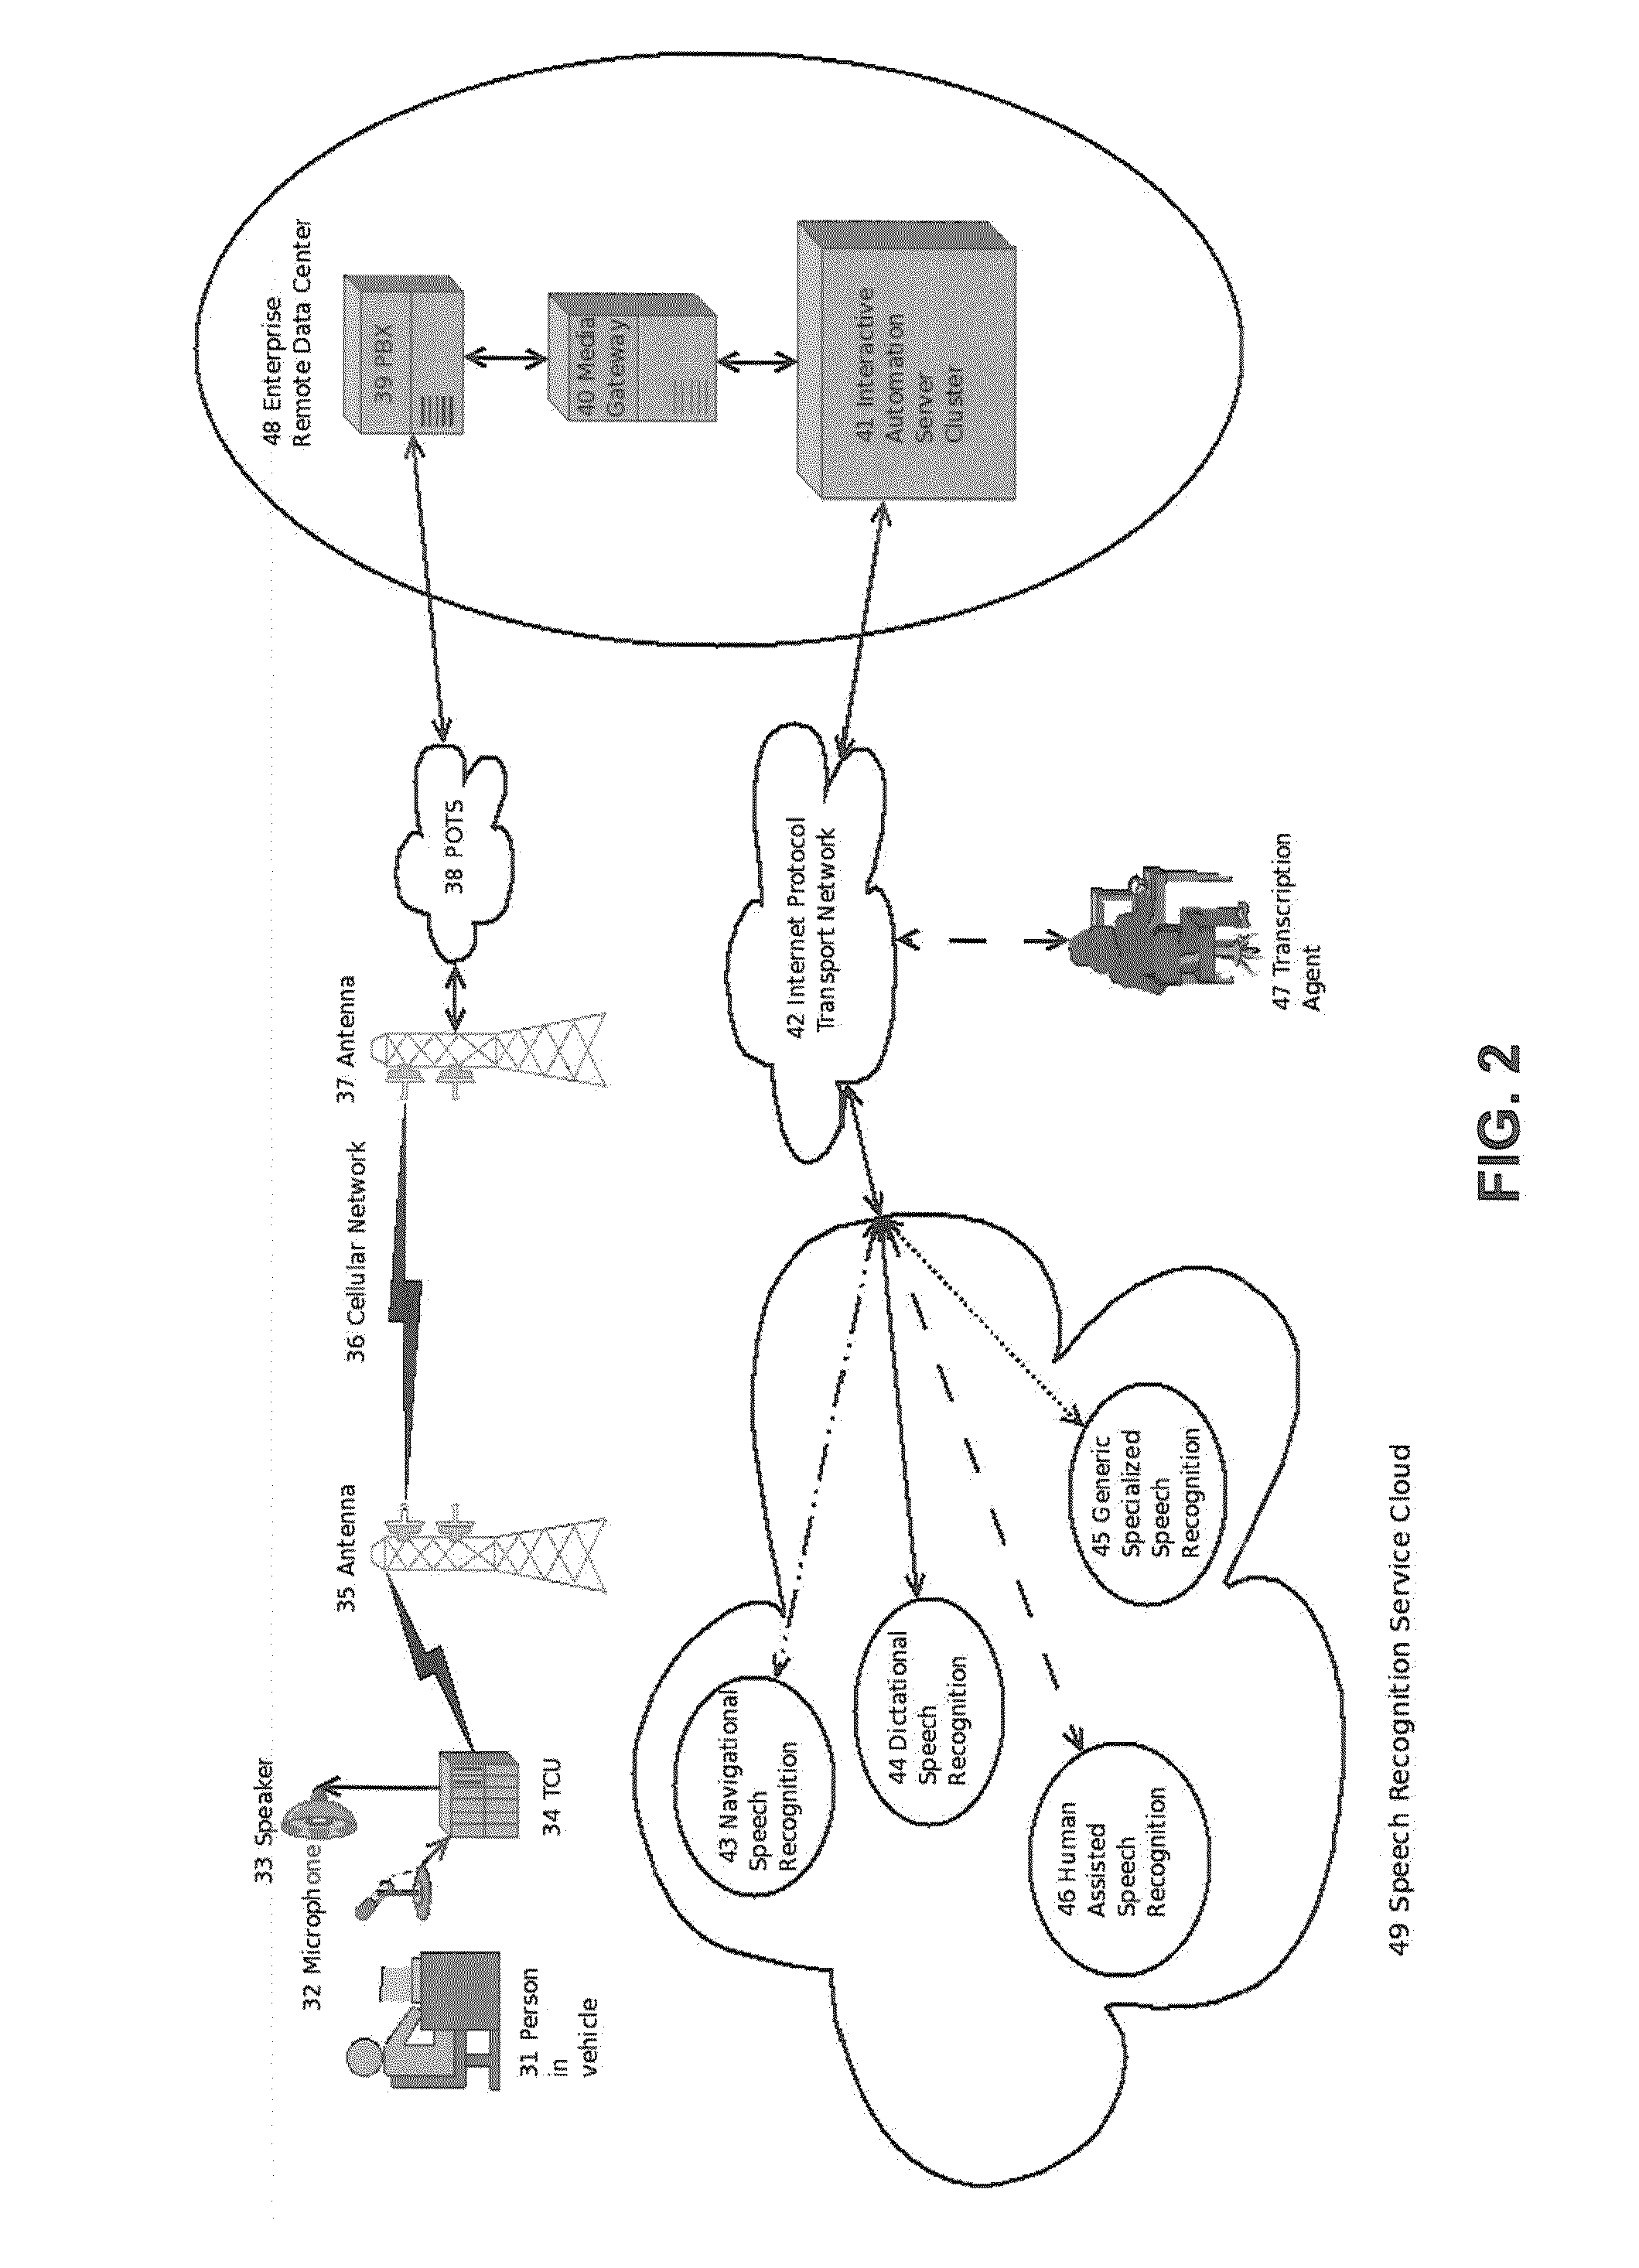 Service Oriented Speech Recognition for In-Vehicle Automated Interaction and In-Vehicle User Interfaces Requiring Minimal Cognitive Driver Processing for Same